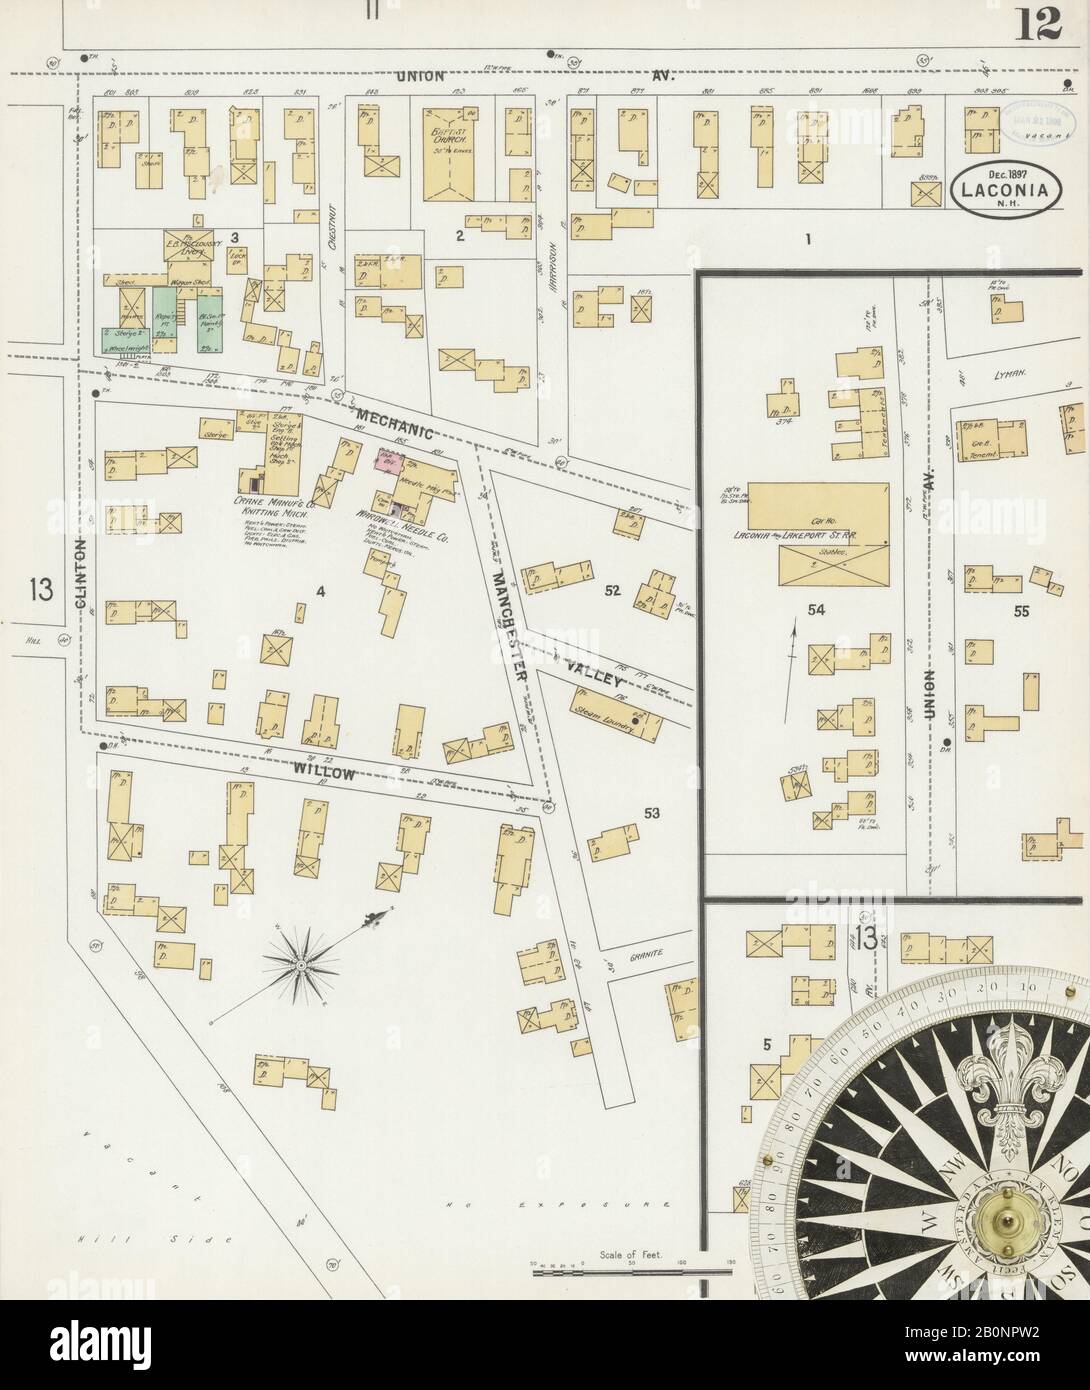 Image 12 of Sanborn Fire Insurance Map from Laconia, Belknap County, New Hampshire. Dec 1897. 13 Sheet(s), America, street map with a Nineteenth Century compass Stock Photo